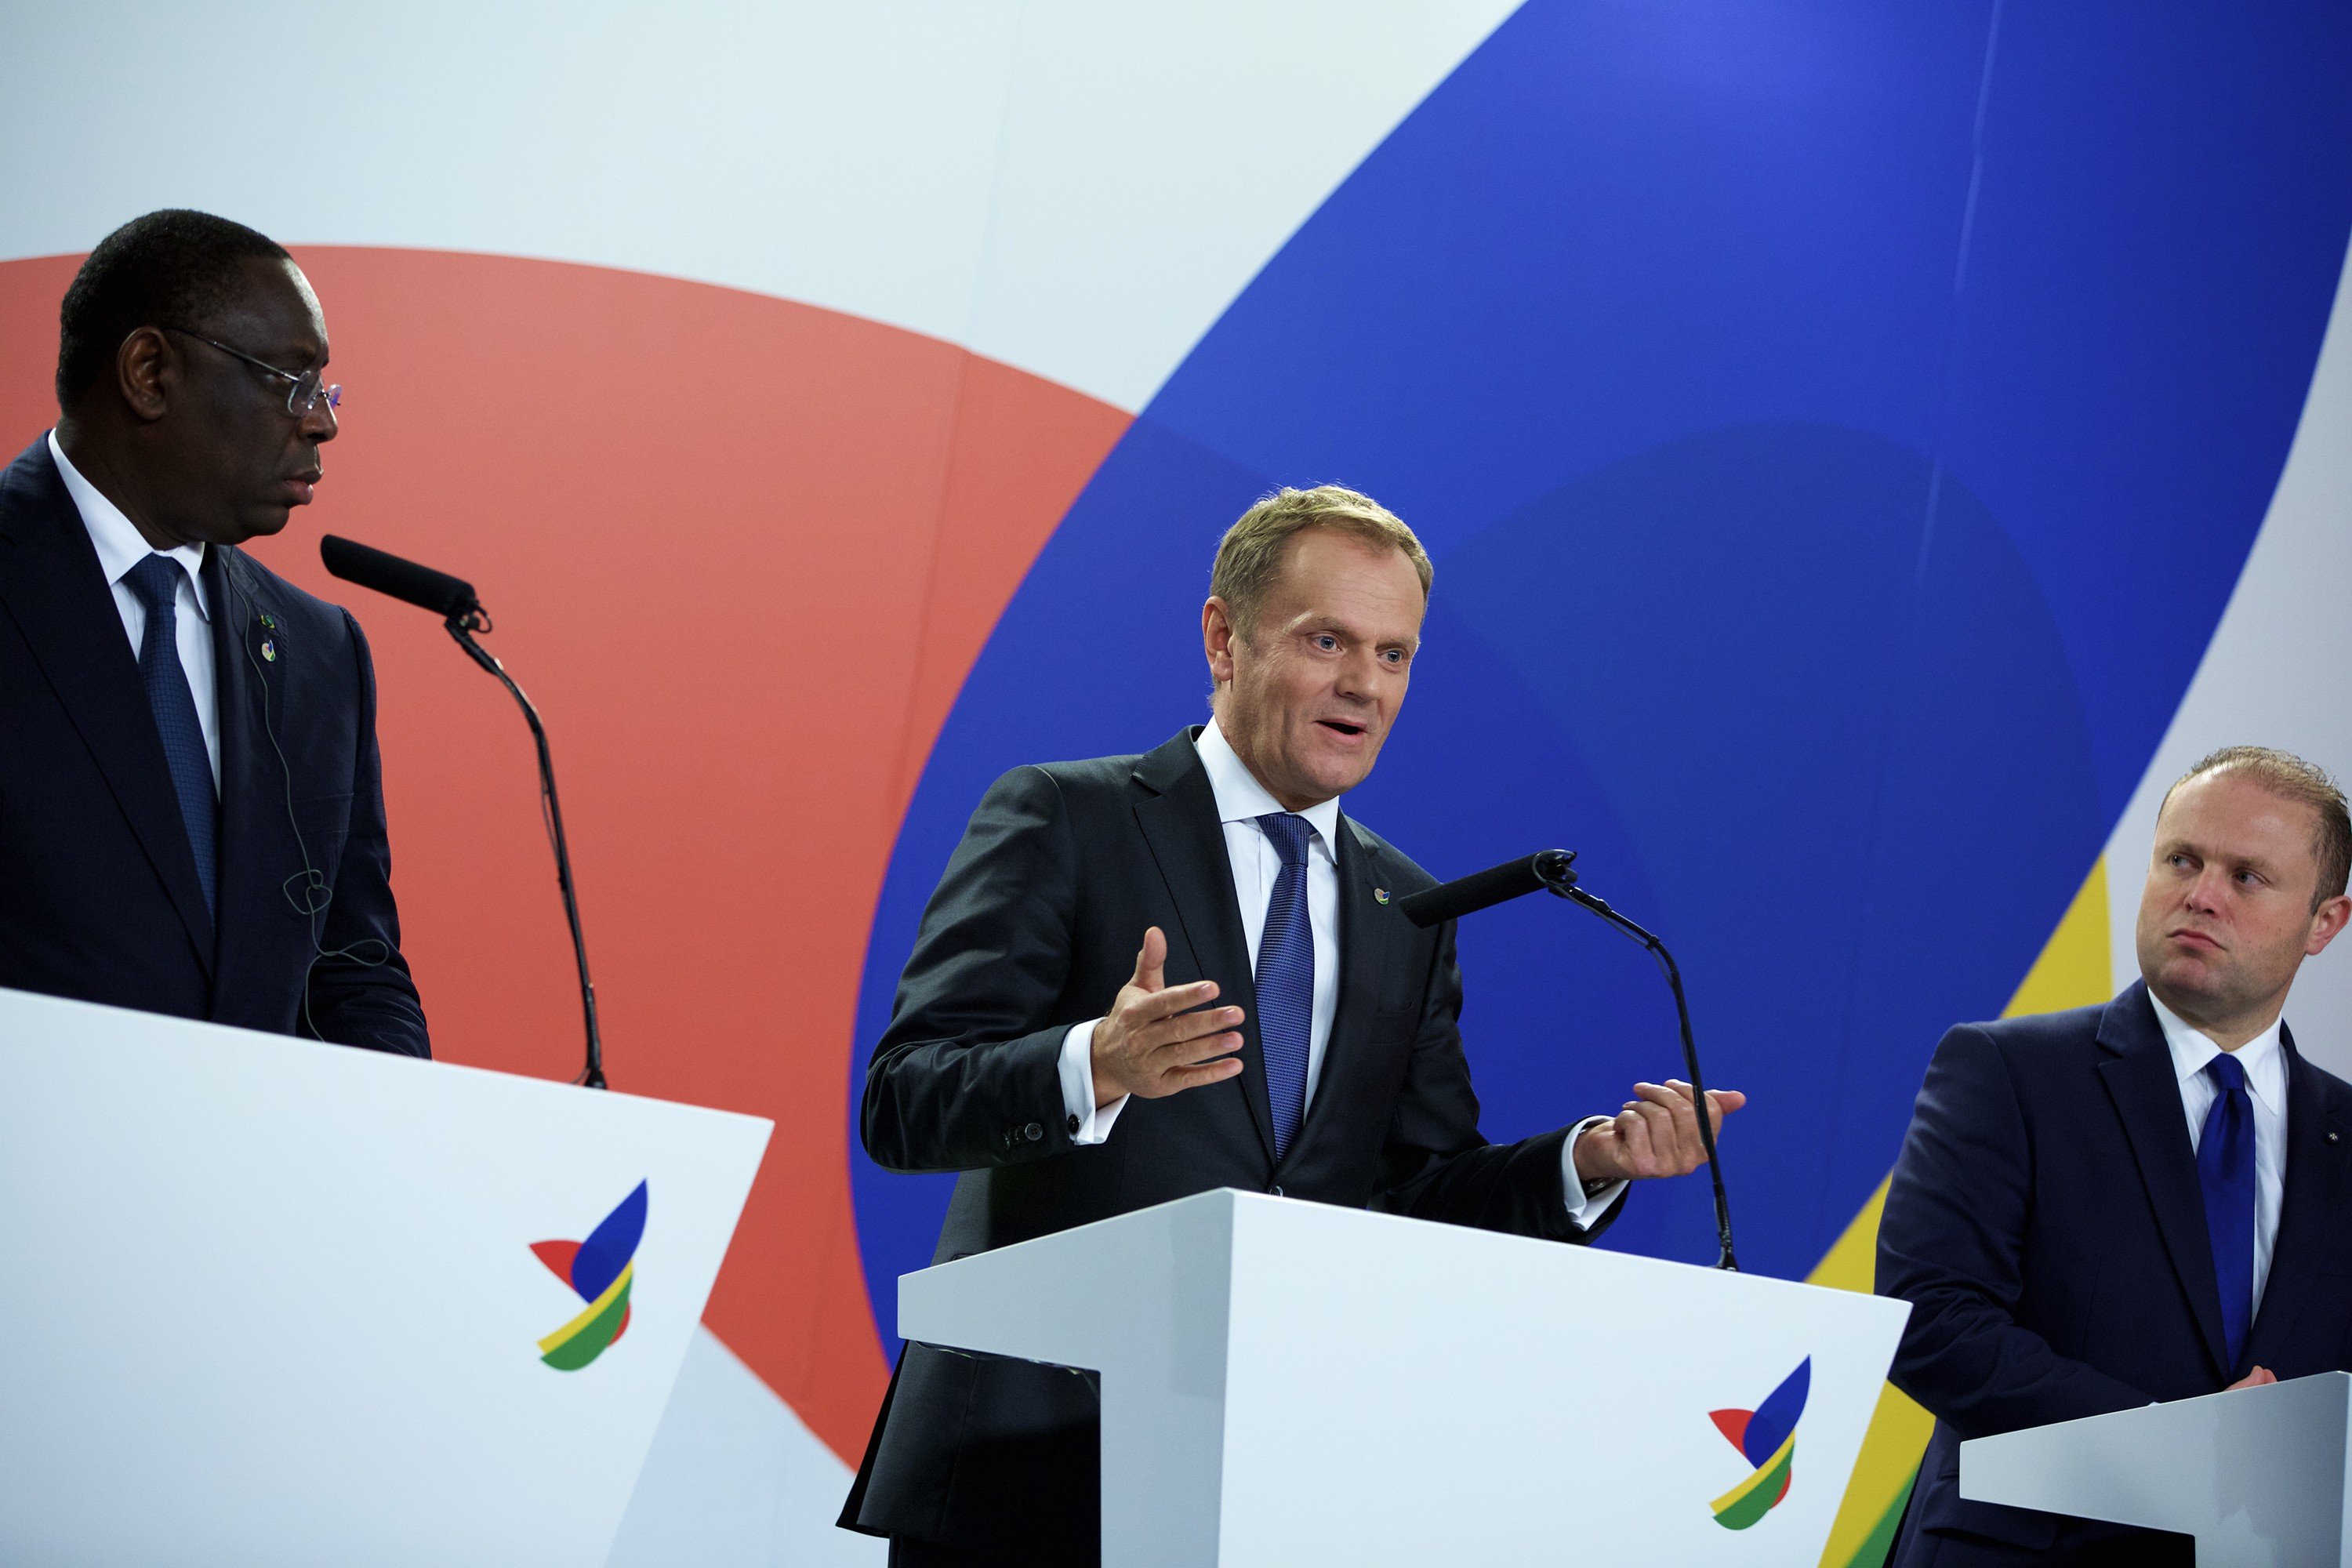 President of the European Council Donald Tusk speaks at the press conference with Prime Minister of Malta Joseph Muscat (L) and President of Senegal Macky Sall (R) following a two-day summit on migration that ended in Valletta, Malta, on Nov. 12, 2015.